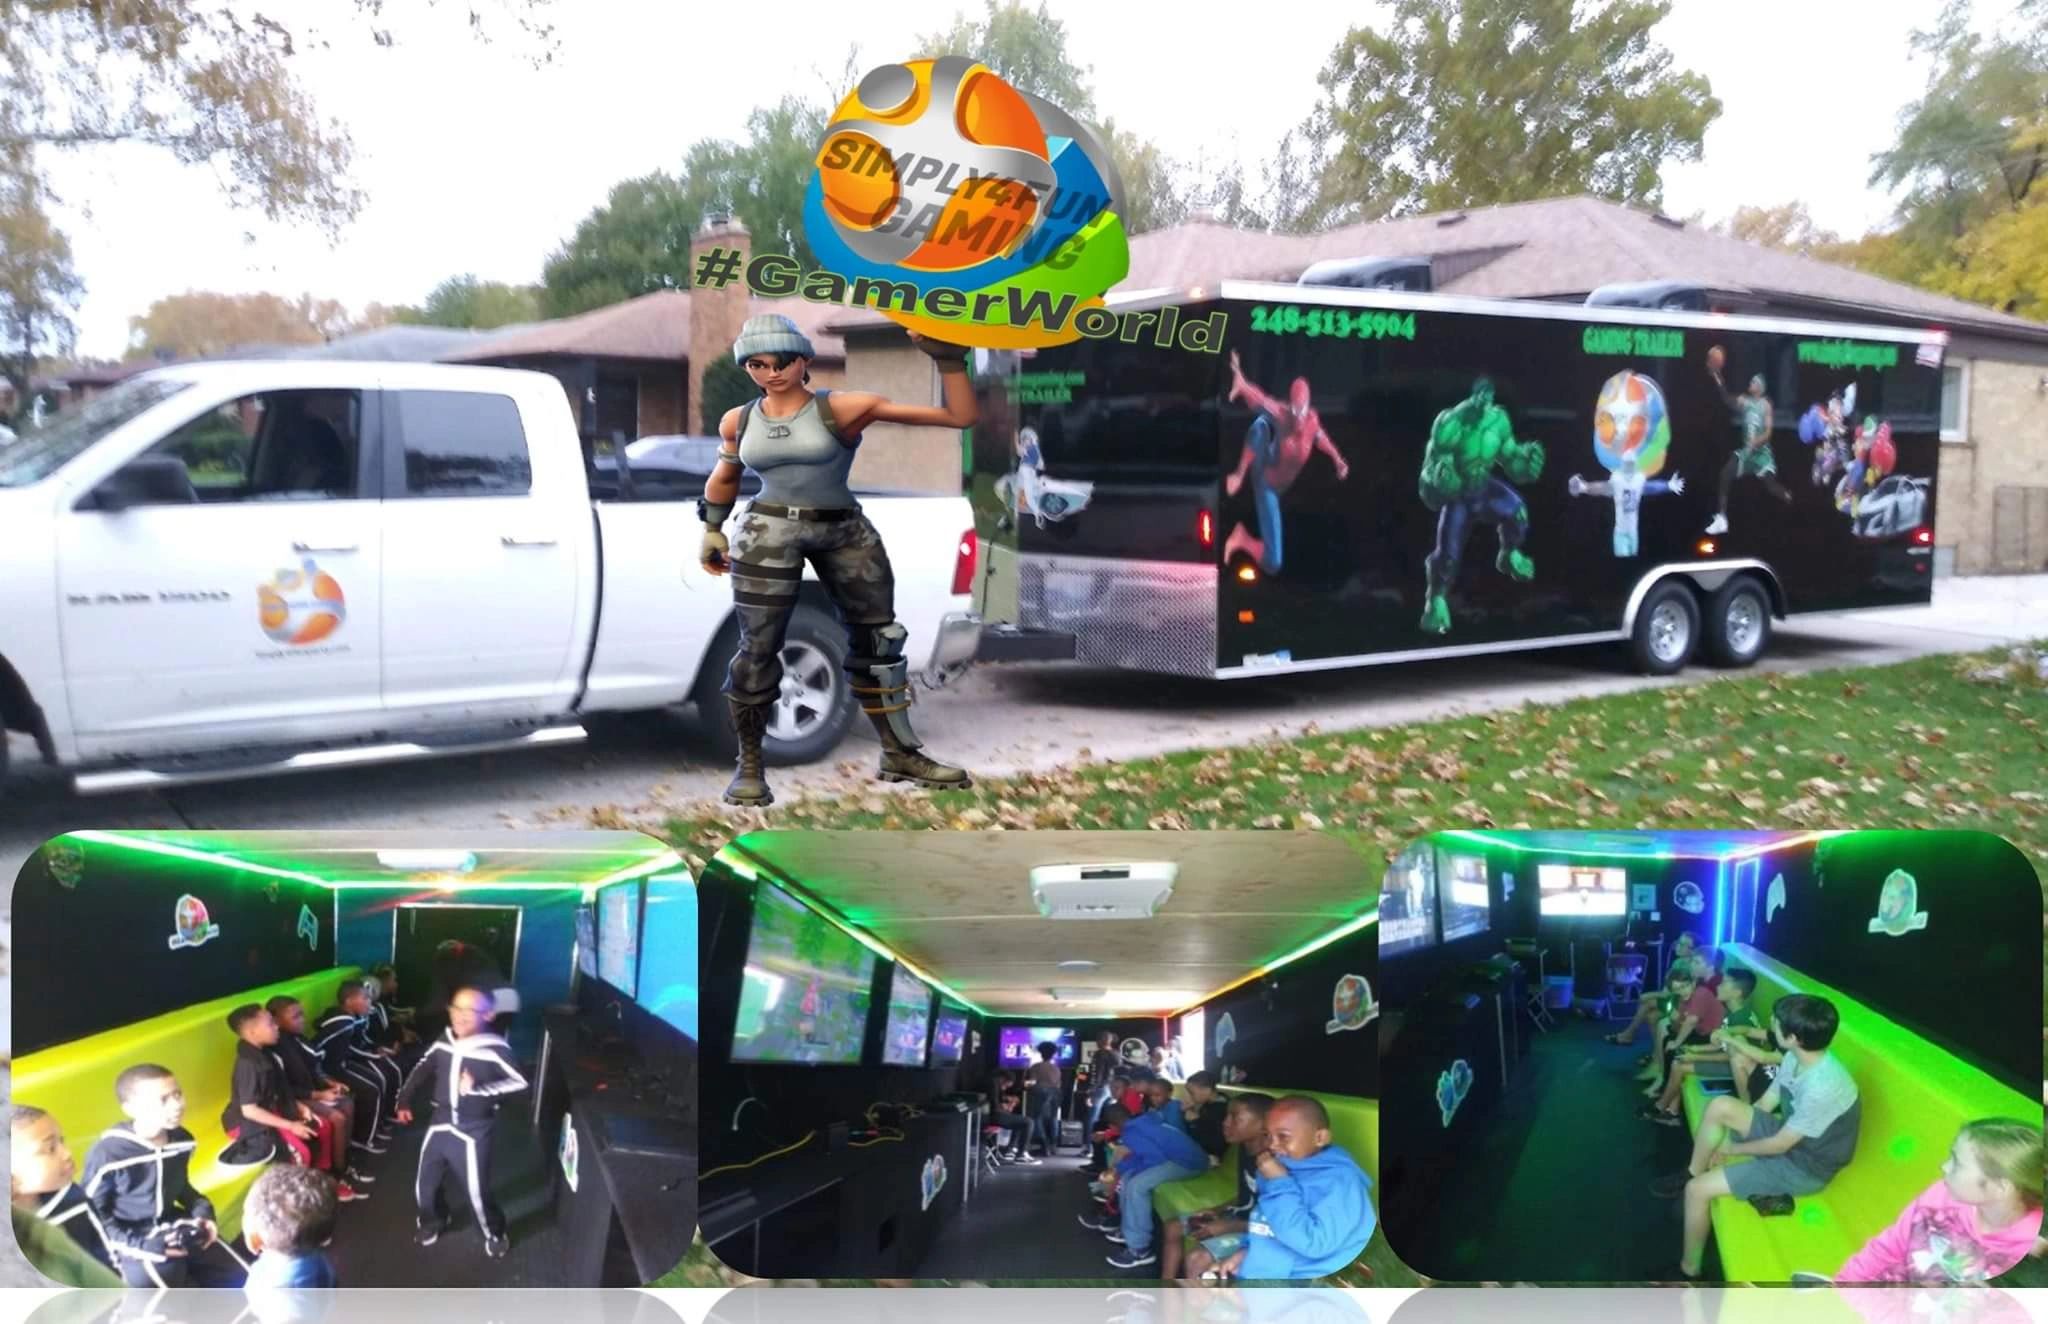 Simply 4fun Gaming Video Game Truck Mobile Video Game Trailer